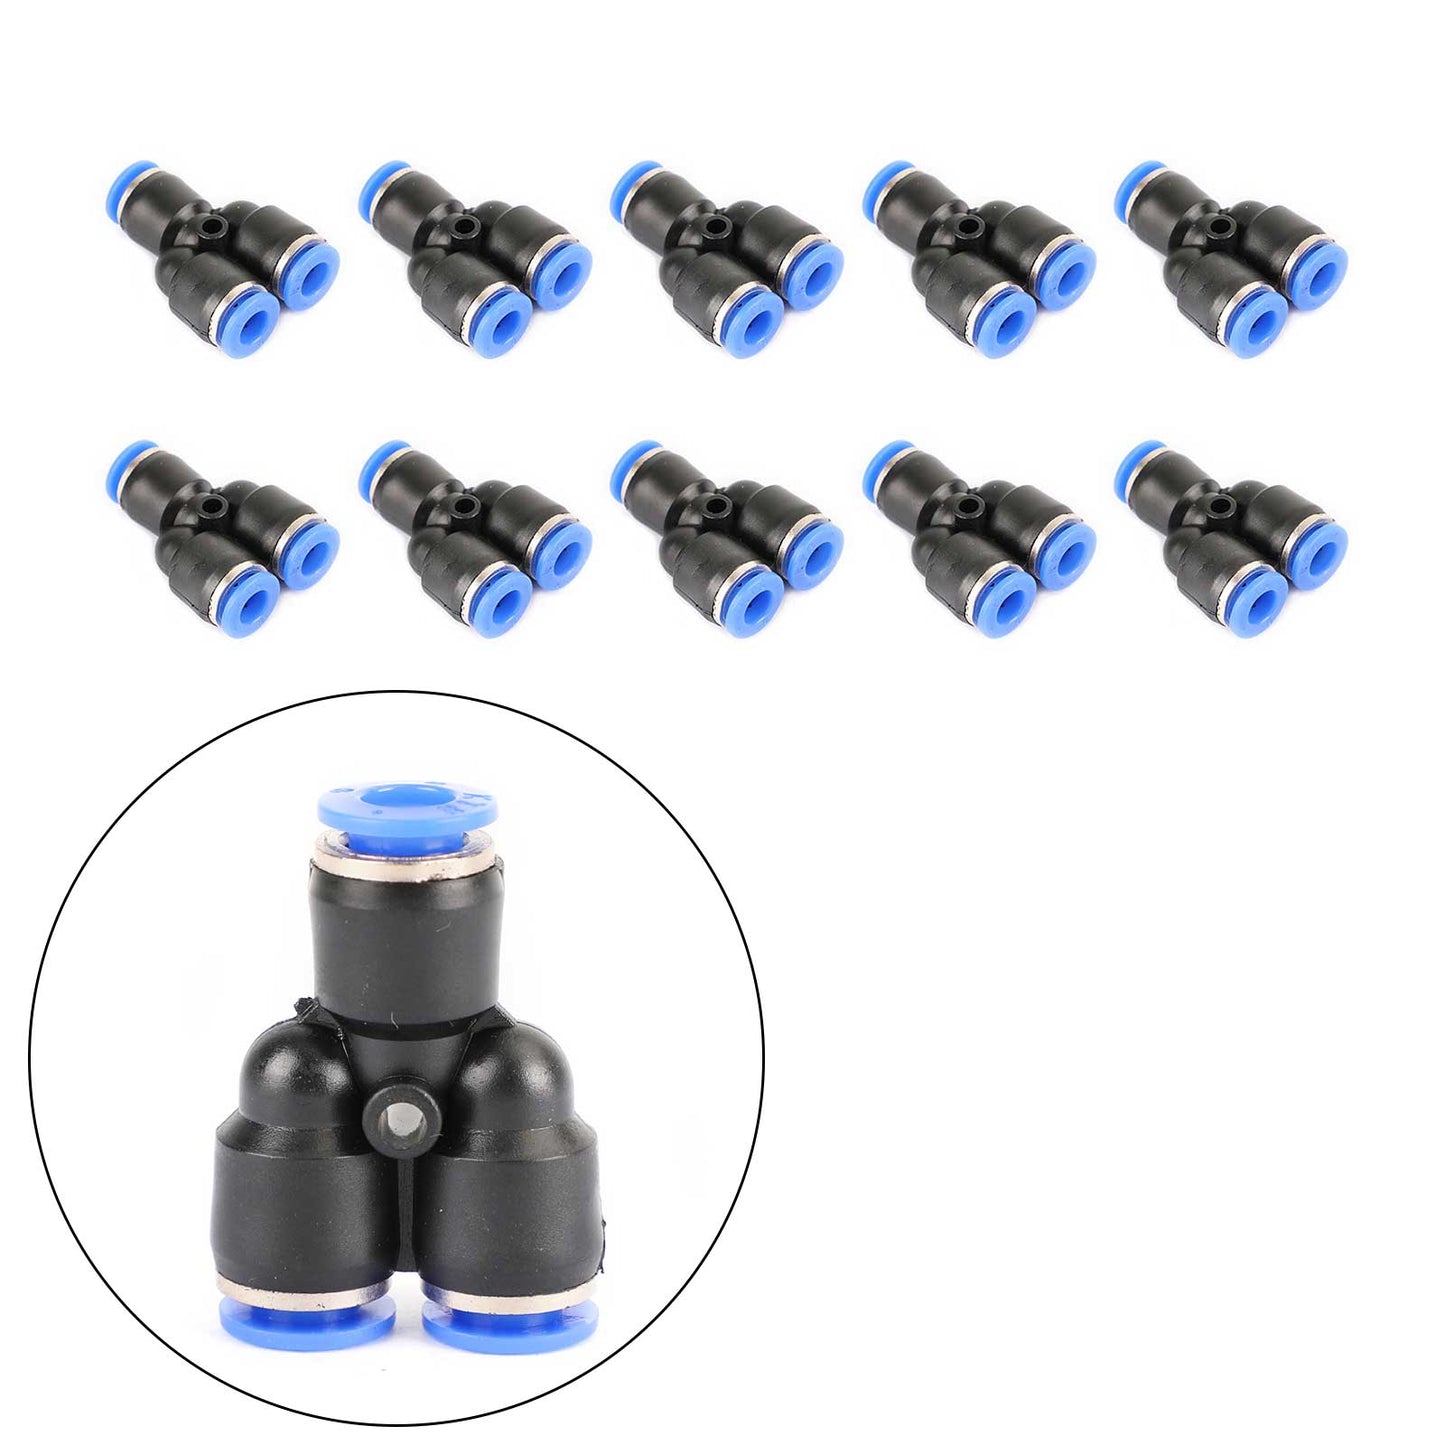 1Pcs New Mini Push Button SPST Momentary N/O OFF-ON Switch 10mm Black For Car